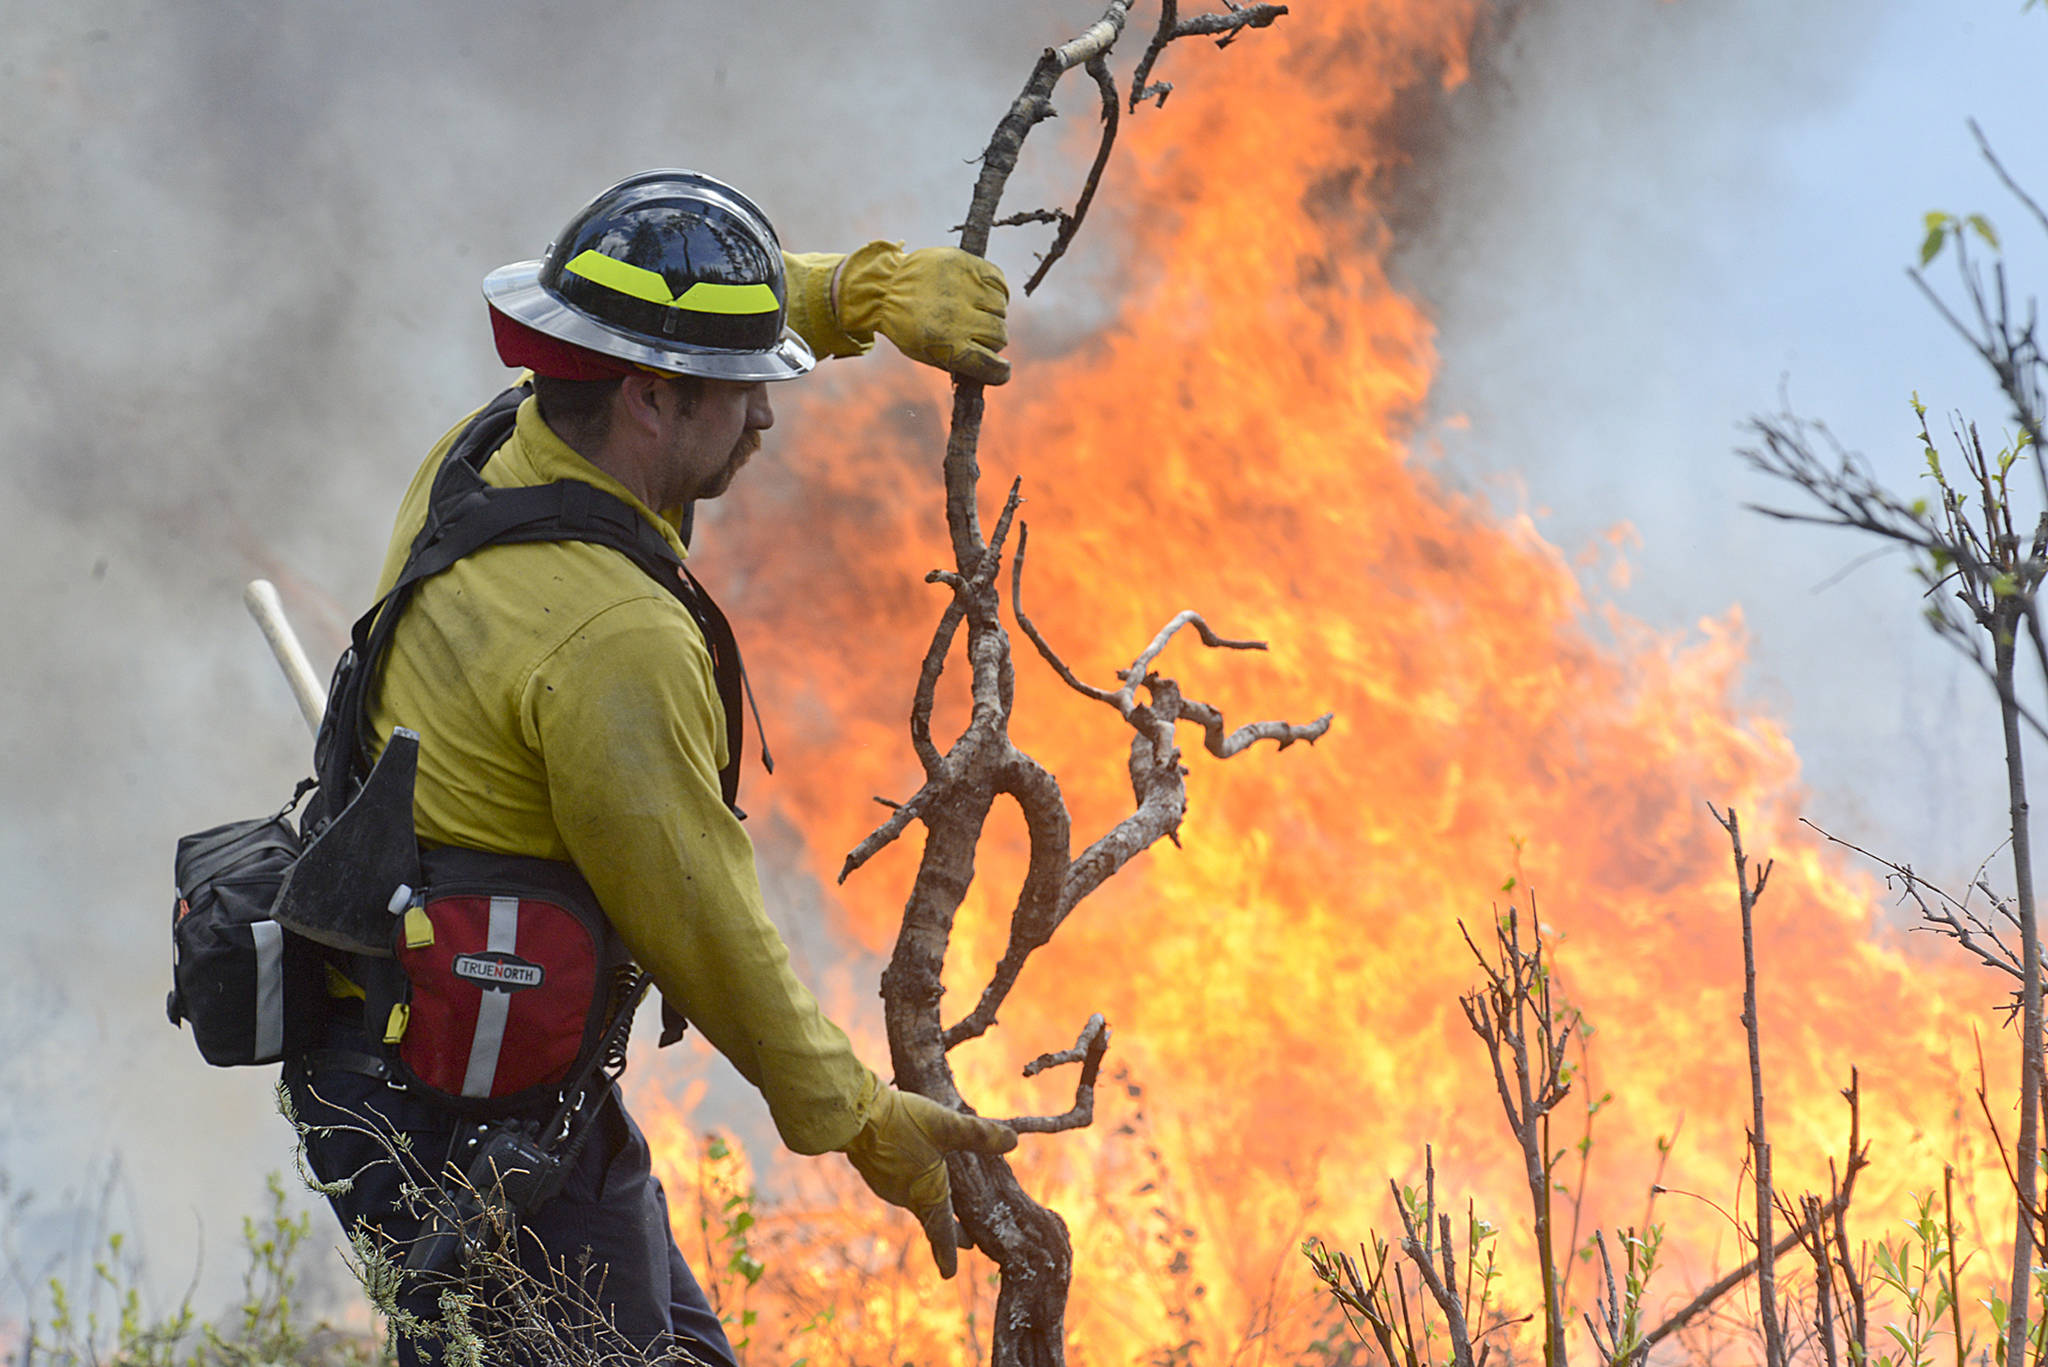 In this May 22, 2014 photo, Central Emergency Services firefighter Josh Thompson throws brush into a fire along Funny River Road as the group works to control the burning Funny River wildfire which consumed more than 63,000 acres of Kenai National Wildlife Refuge land. (Clarion file photo)